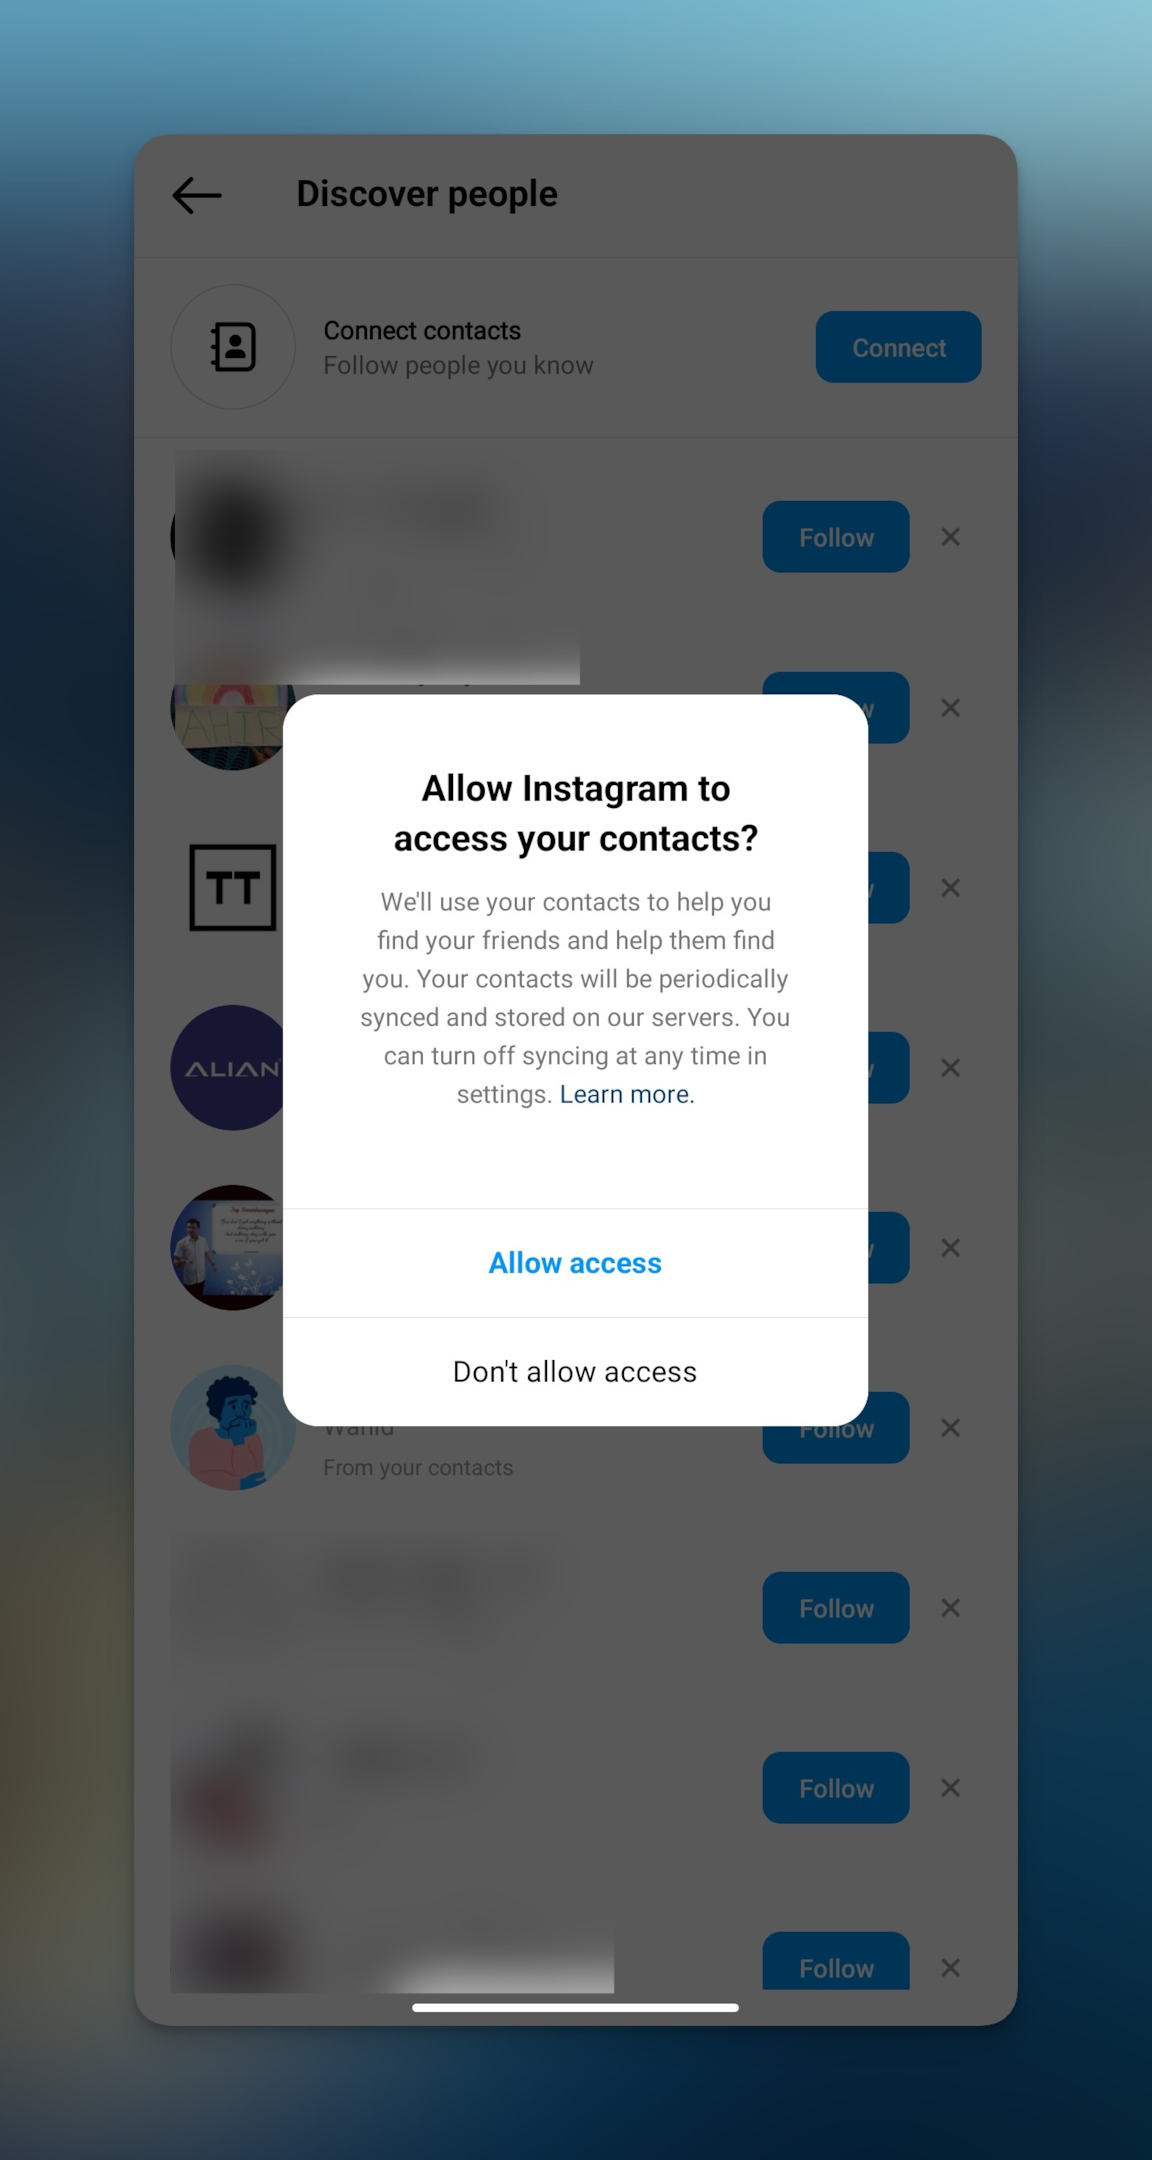 Remote.tools shows to allow access to your contacts to sync with Instagram to discover people